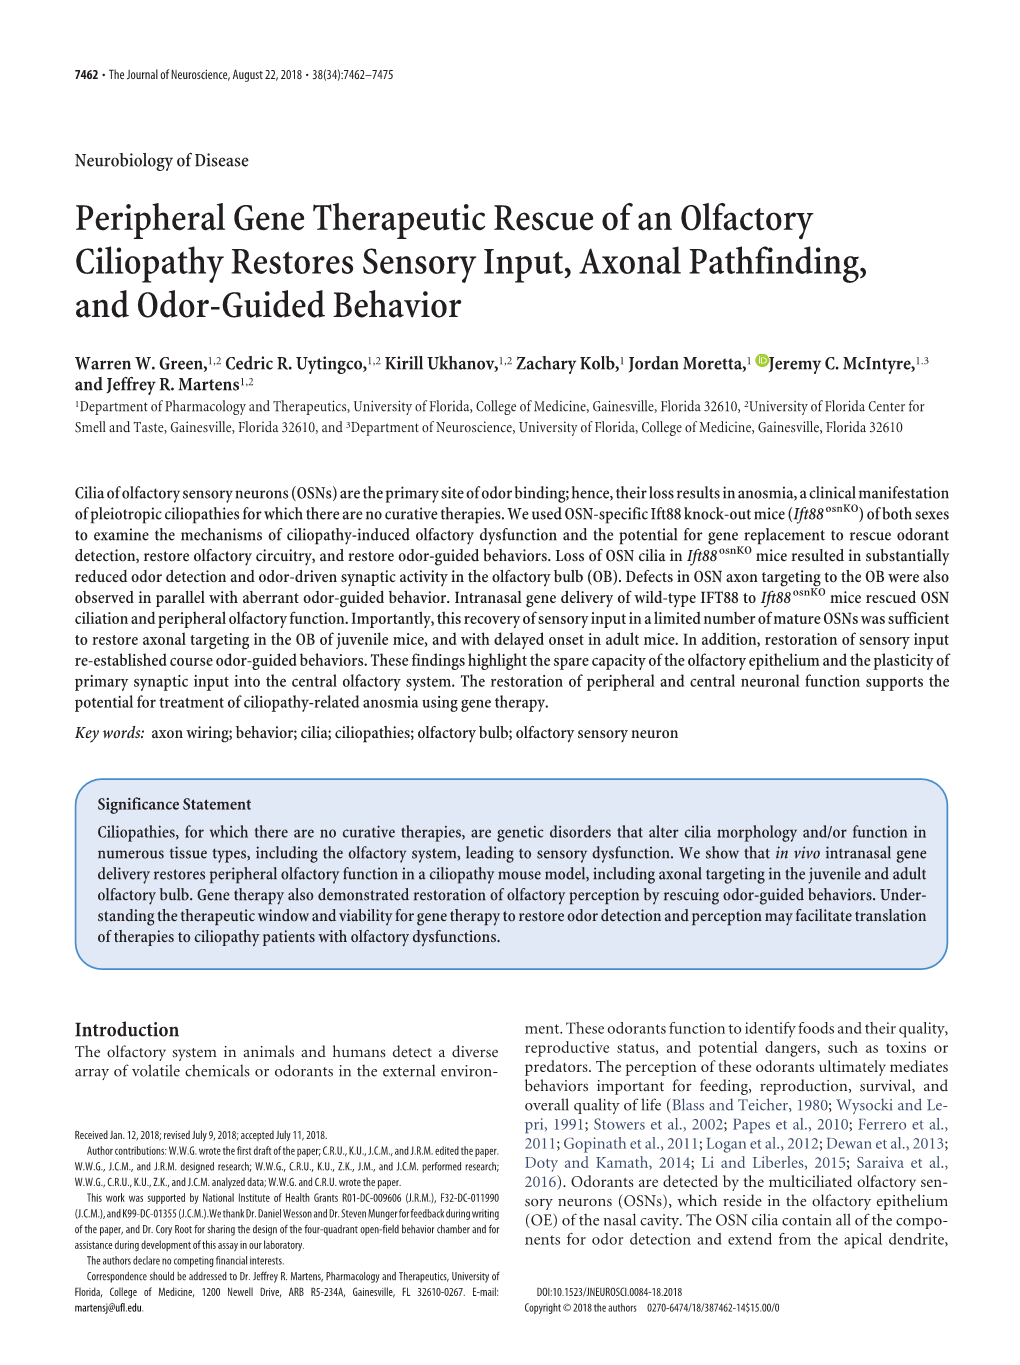 Peripheral Gene Therapeutic Rescue of an Olfactory Ciliopathy Restores Sensory Input, Axonal Pathfinding, and Odor-Guided Behavior